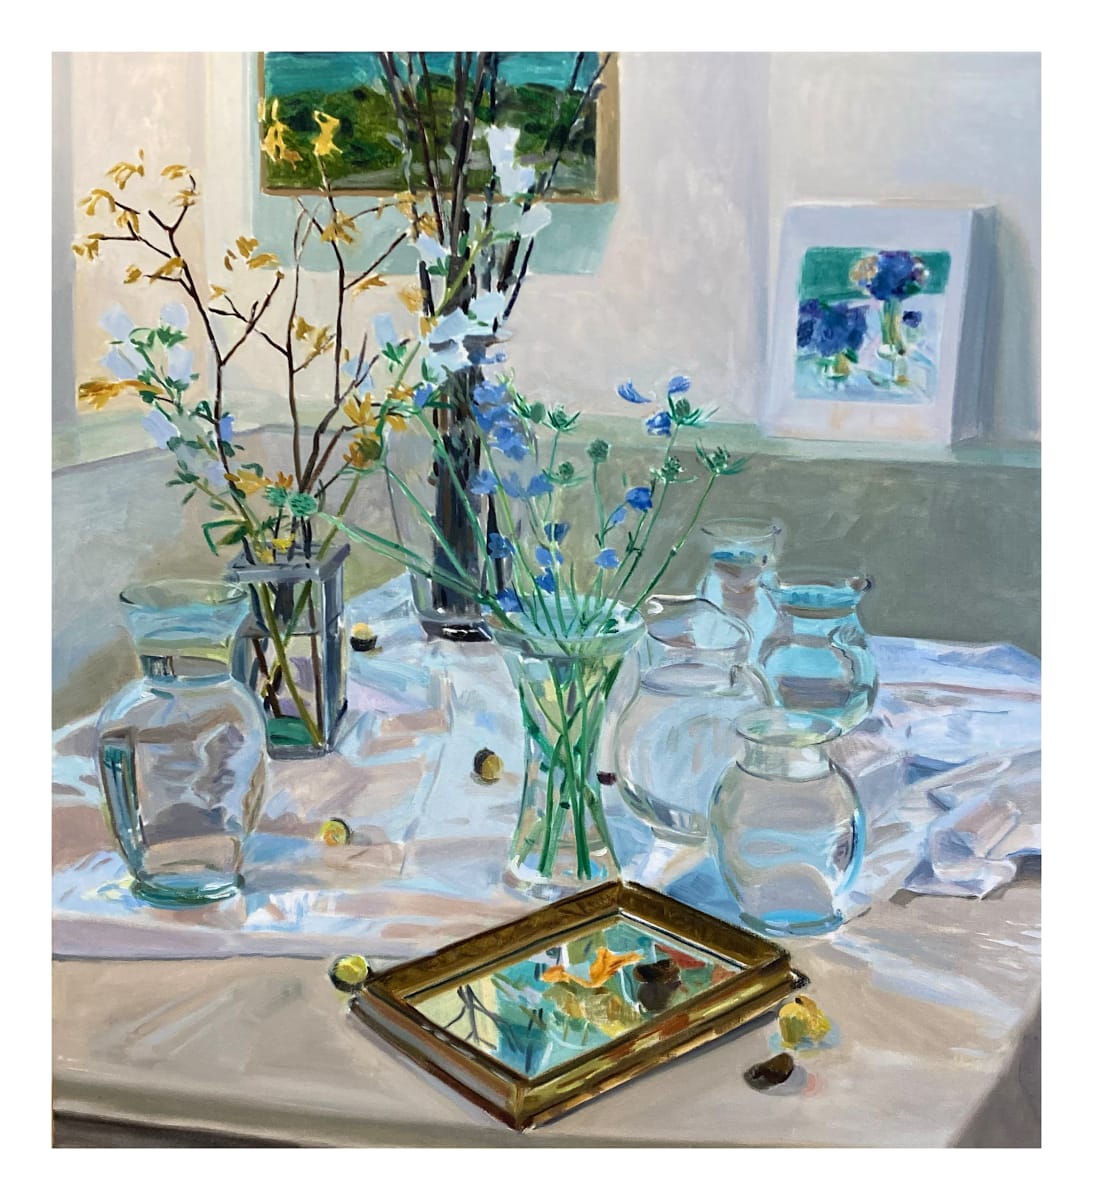 Still Life with Water-Filled Vessels, Flowers and Chocolates by John Schmidtberger  Image: (Temporary Photo)